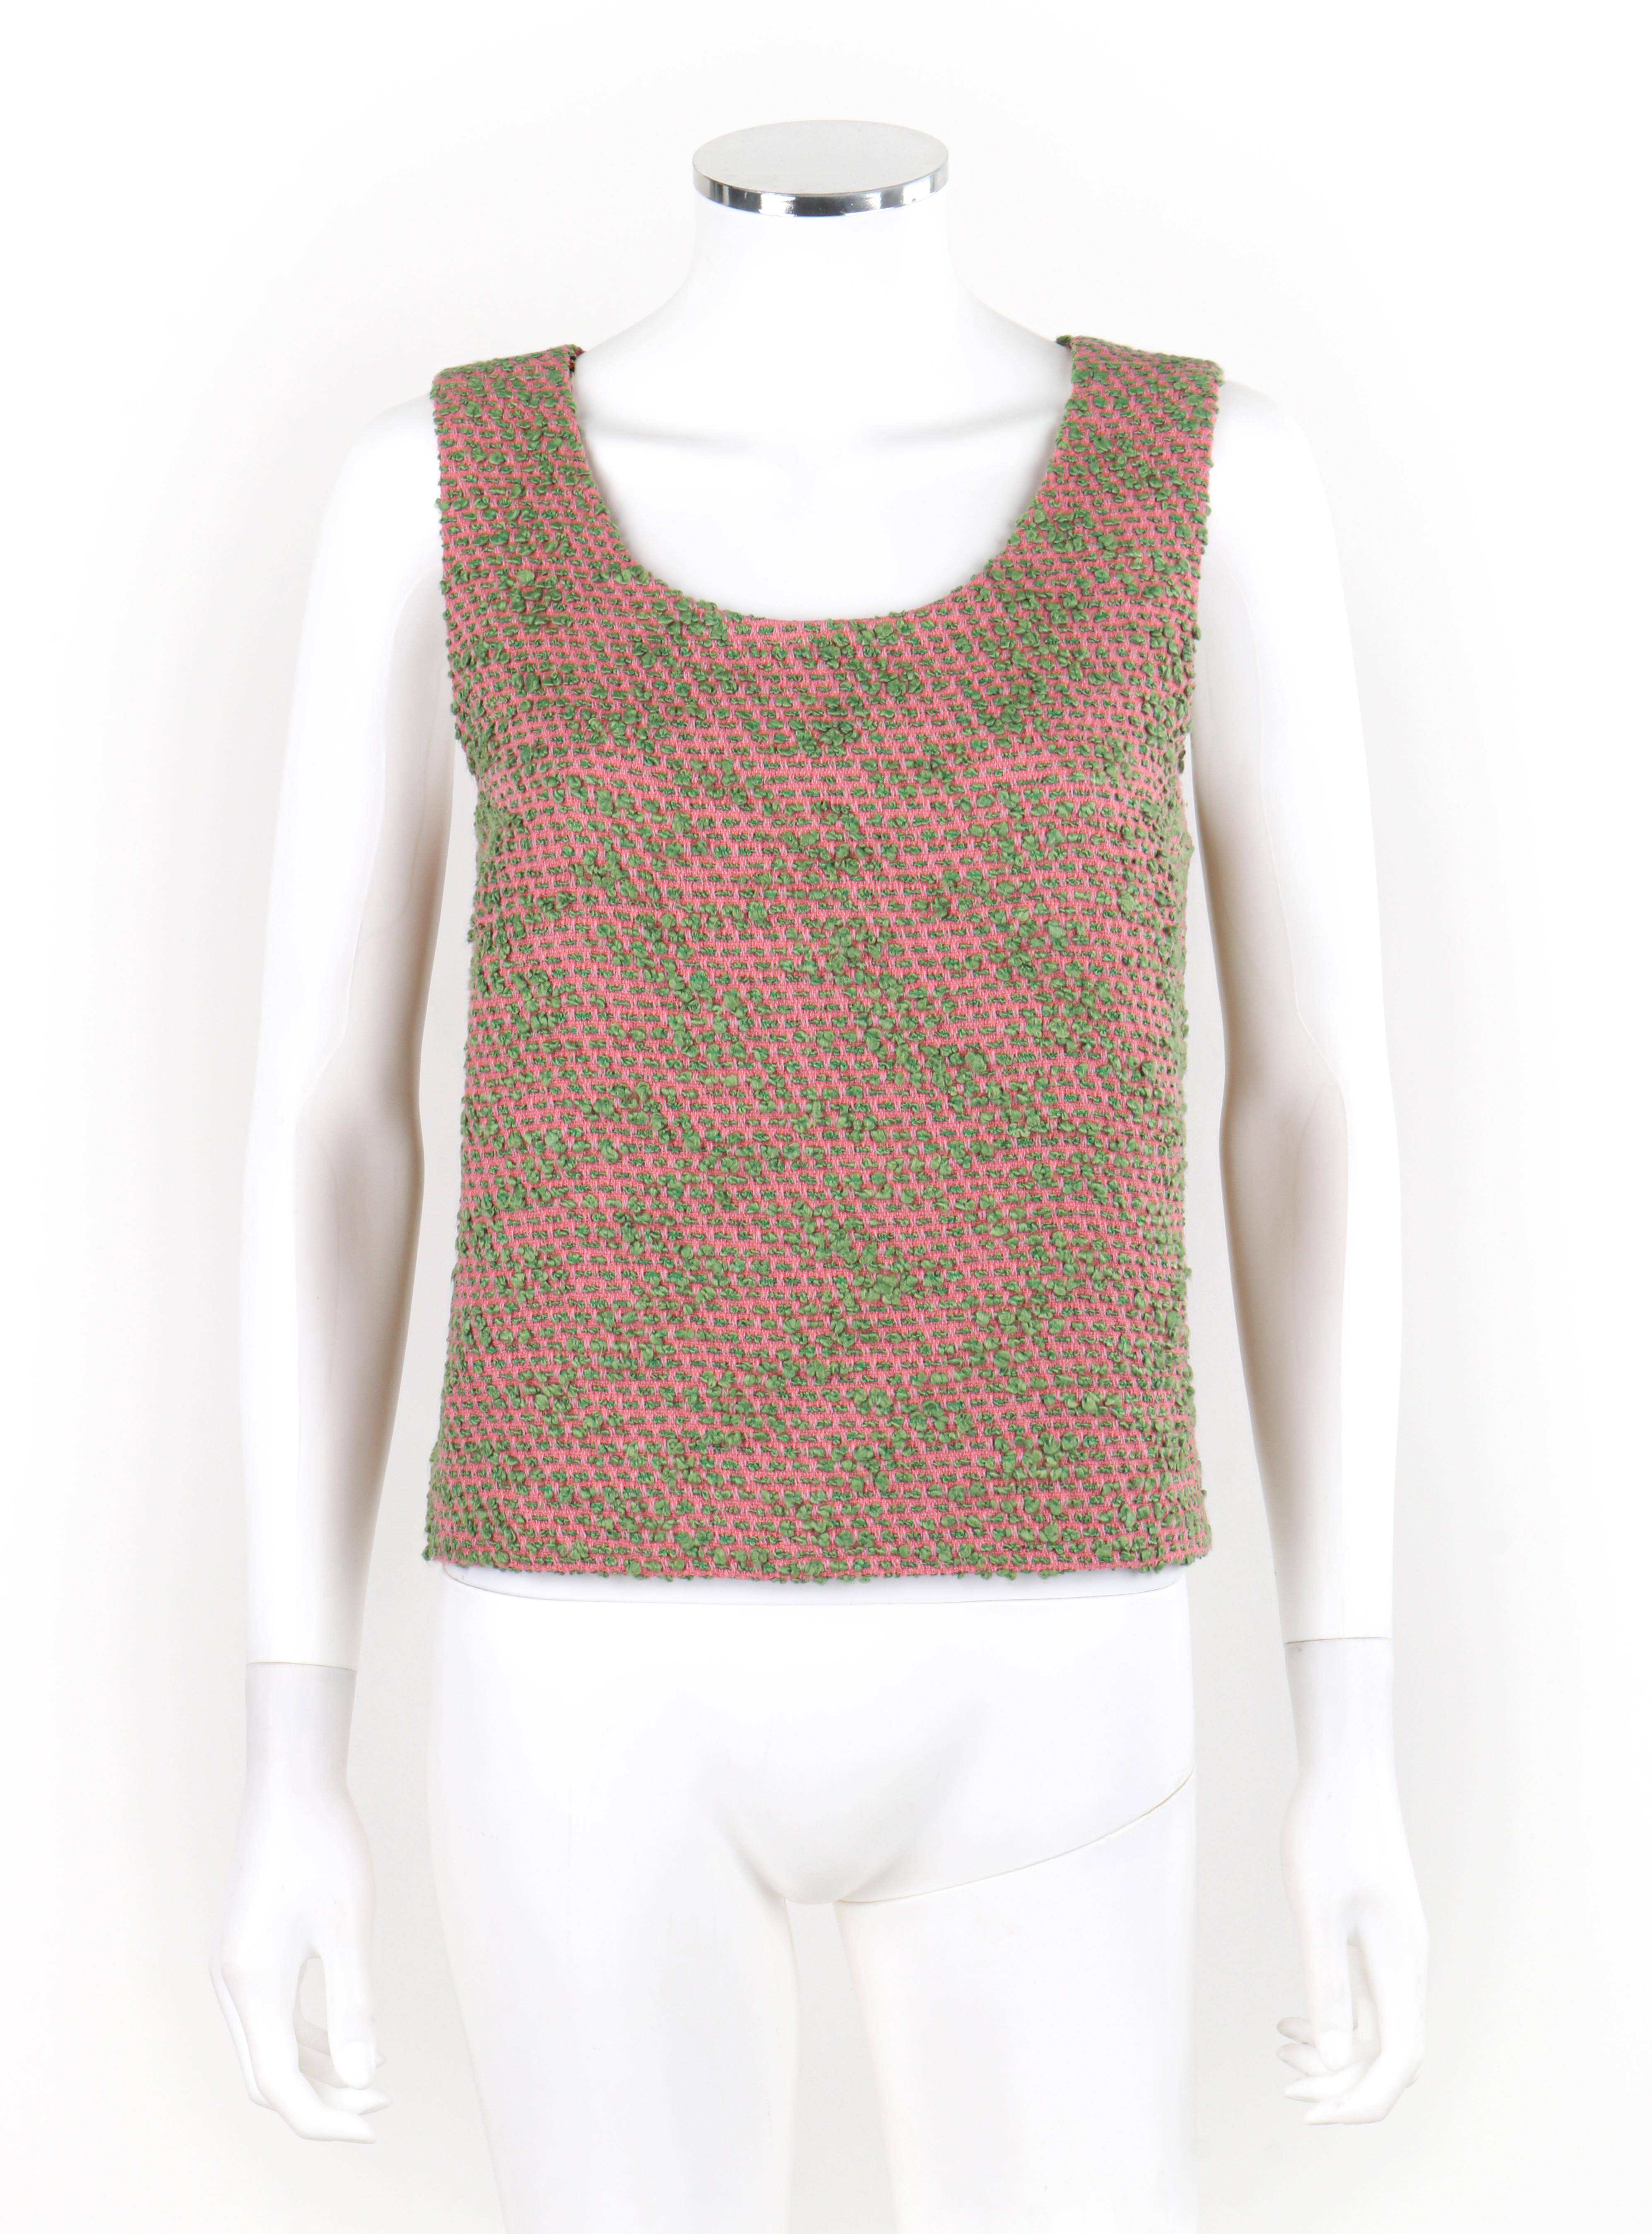 CHANEL c.2000s Pink Green Boucle Knit Silk Jacket & Tank Top Shell 2pc Size 42 For Sale 1